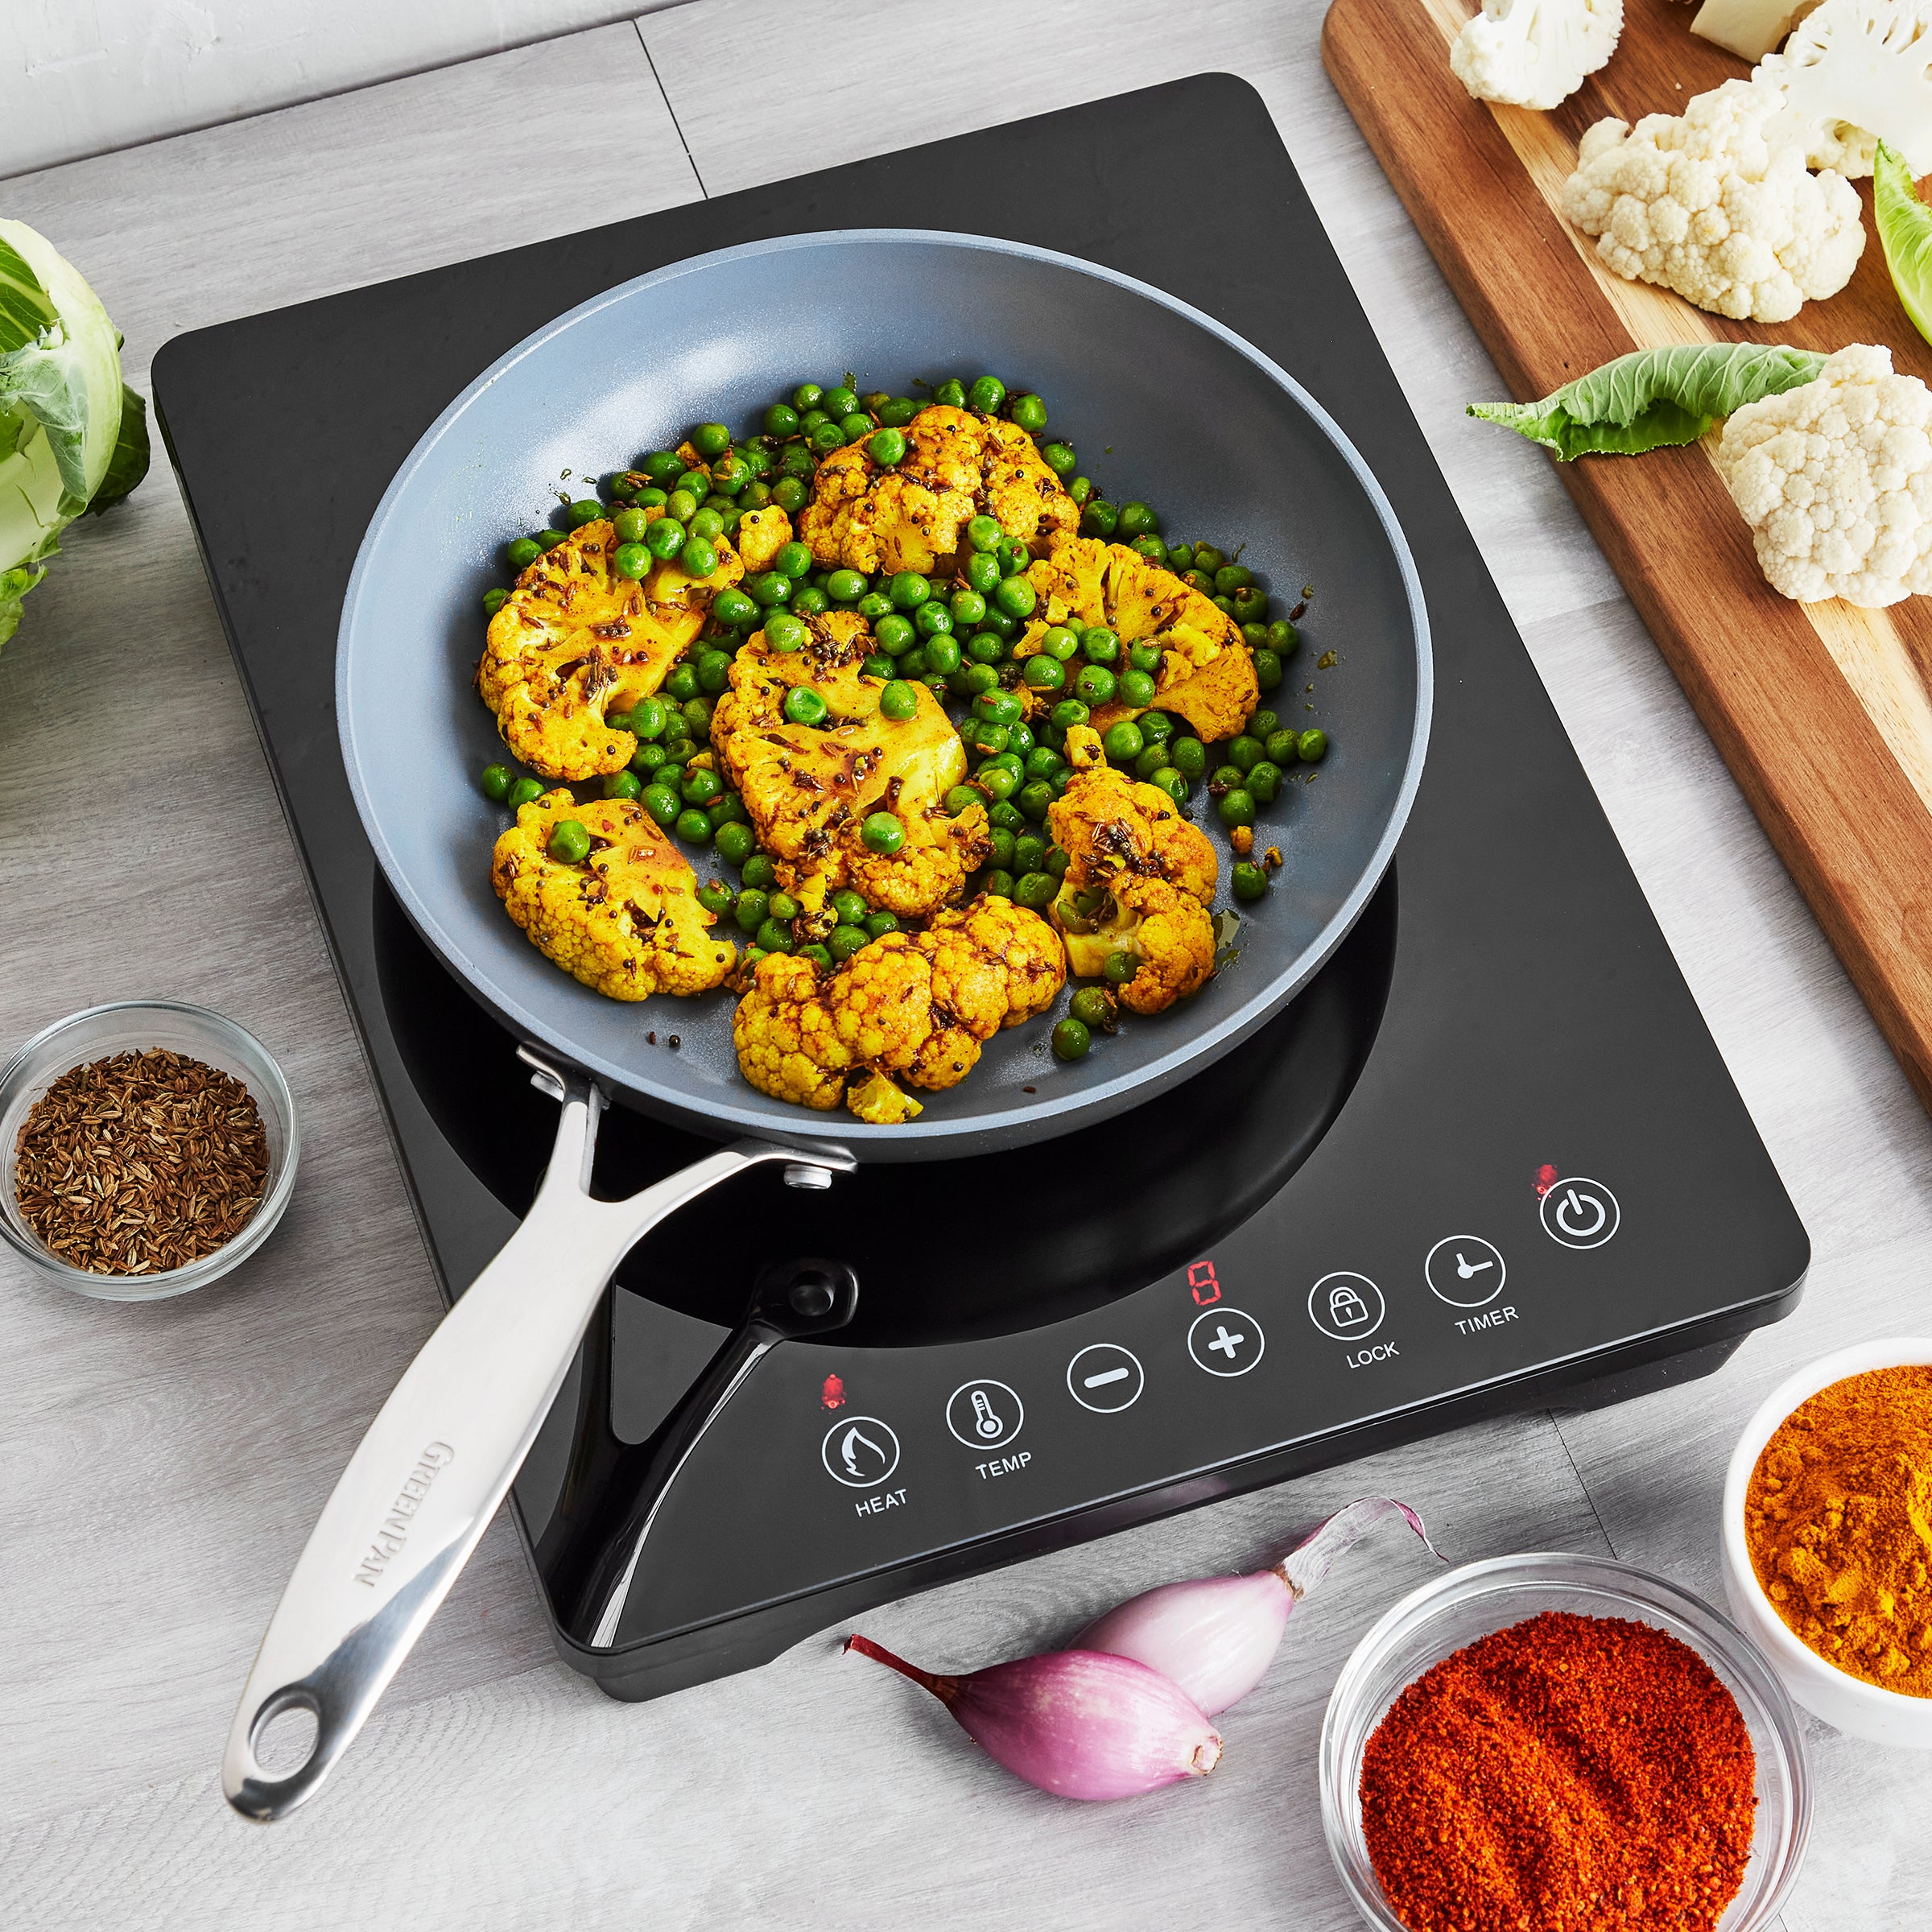 How to buy the right pots and pans for induction cooking